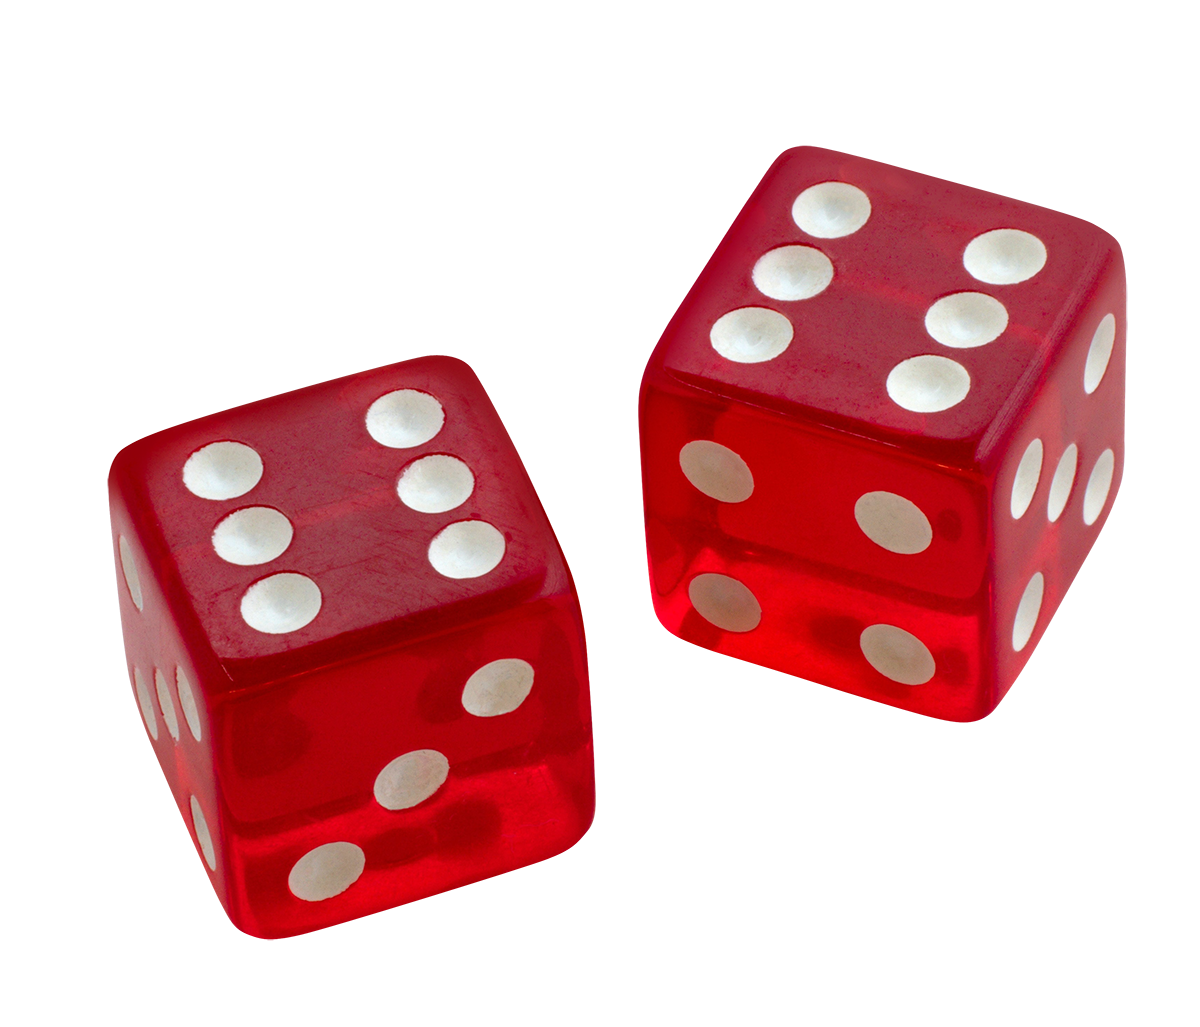 Red dices image, Red dices png, transparent Red dices png image, Red dices png hd images download